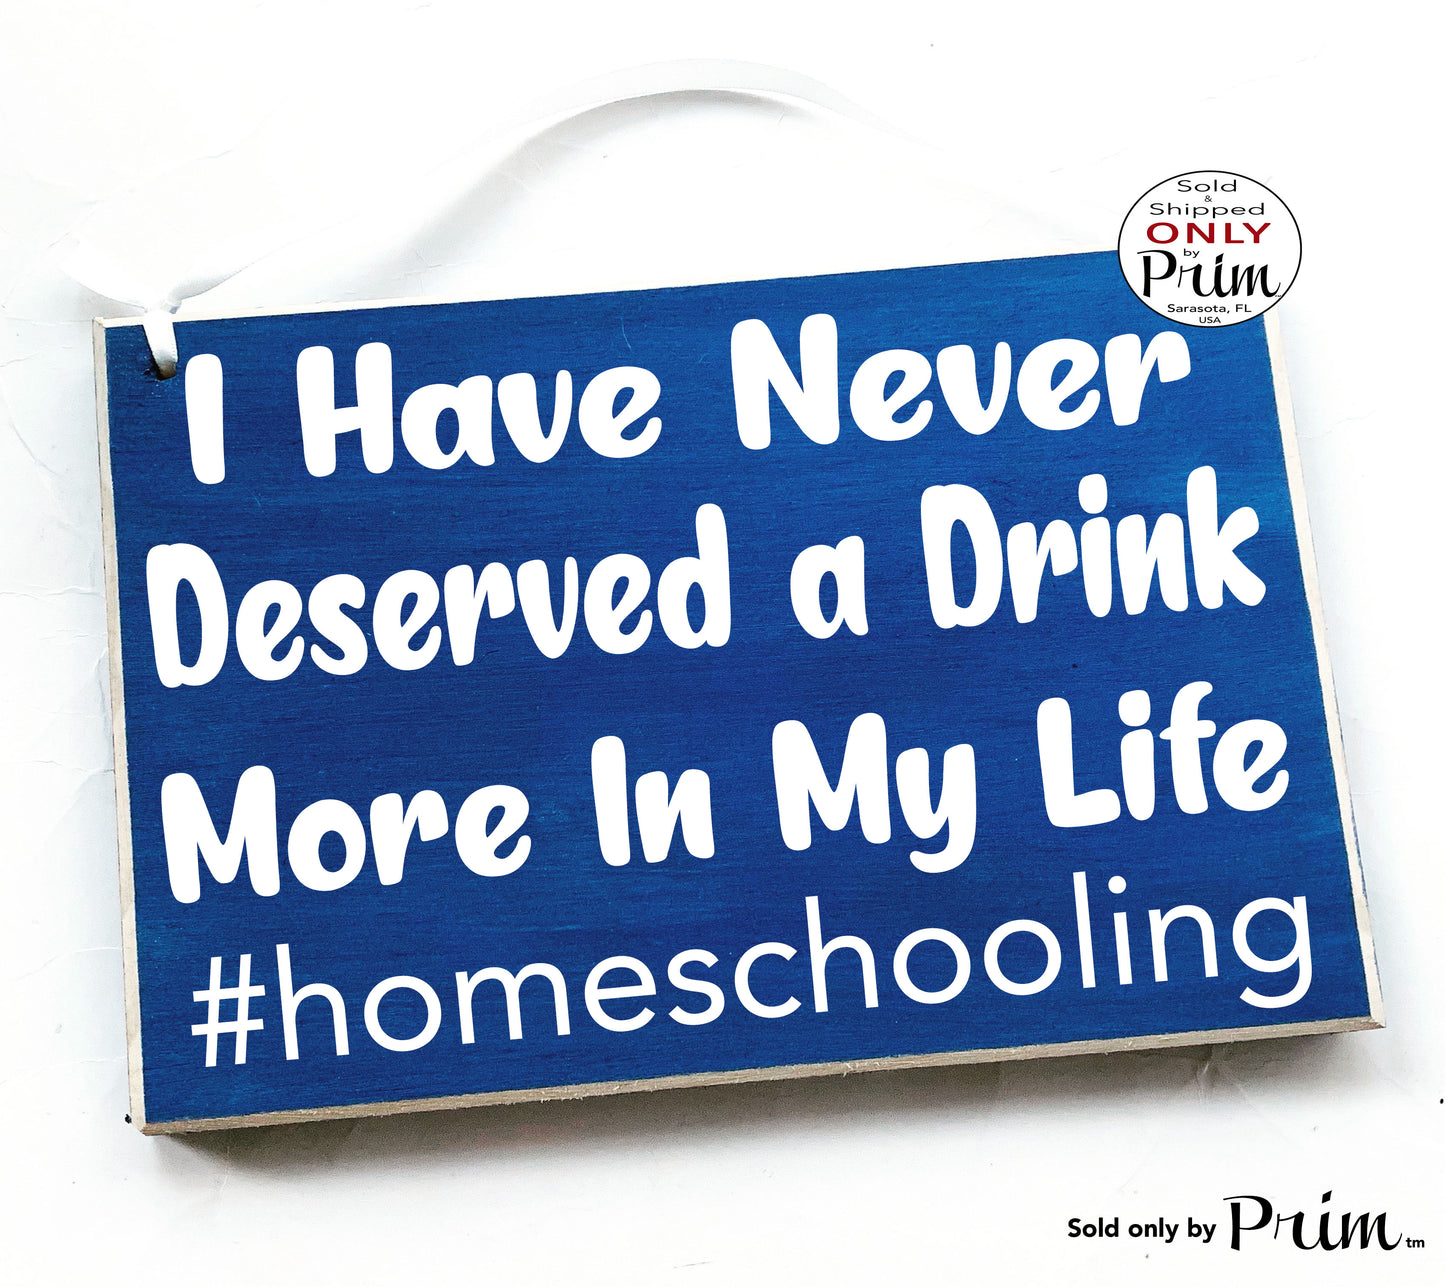 10x8 I Have Never Deserved a Drink More In My Life #homeschooling Custom Wood Sign | Funny Coping Sign | Home School Humor Wall Door Plaque